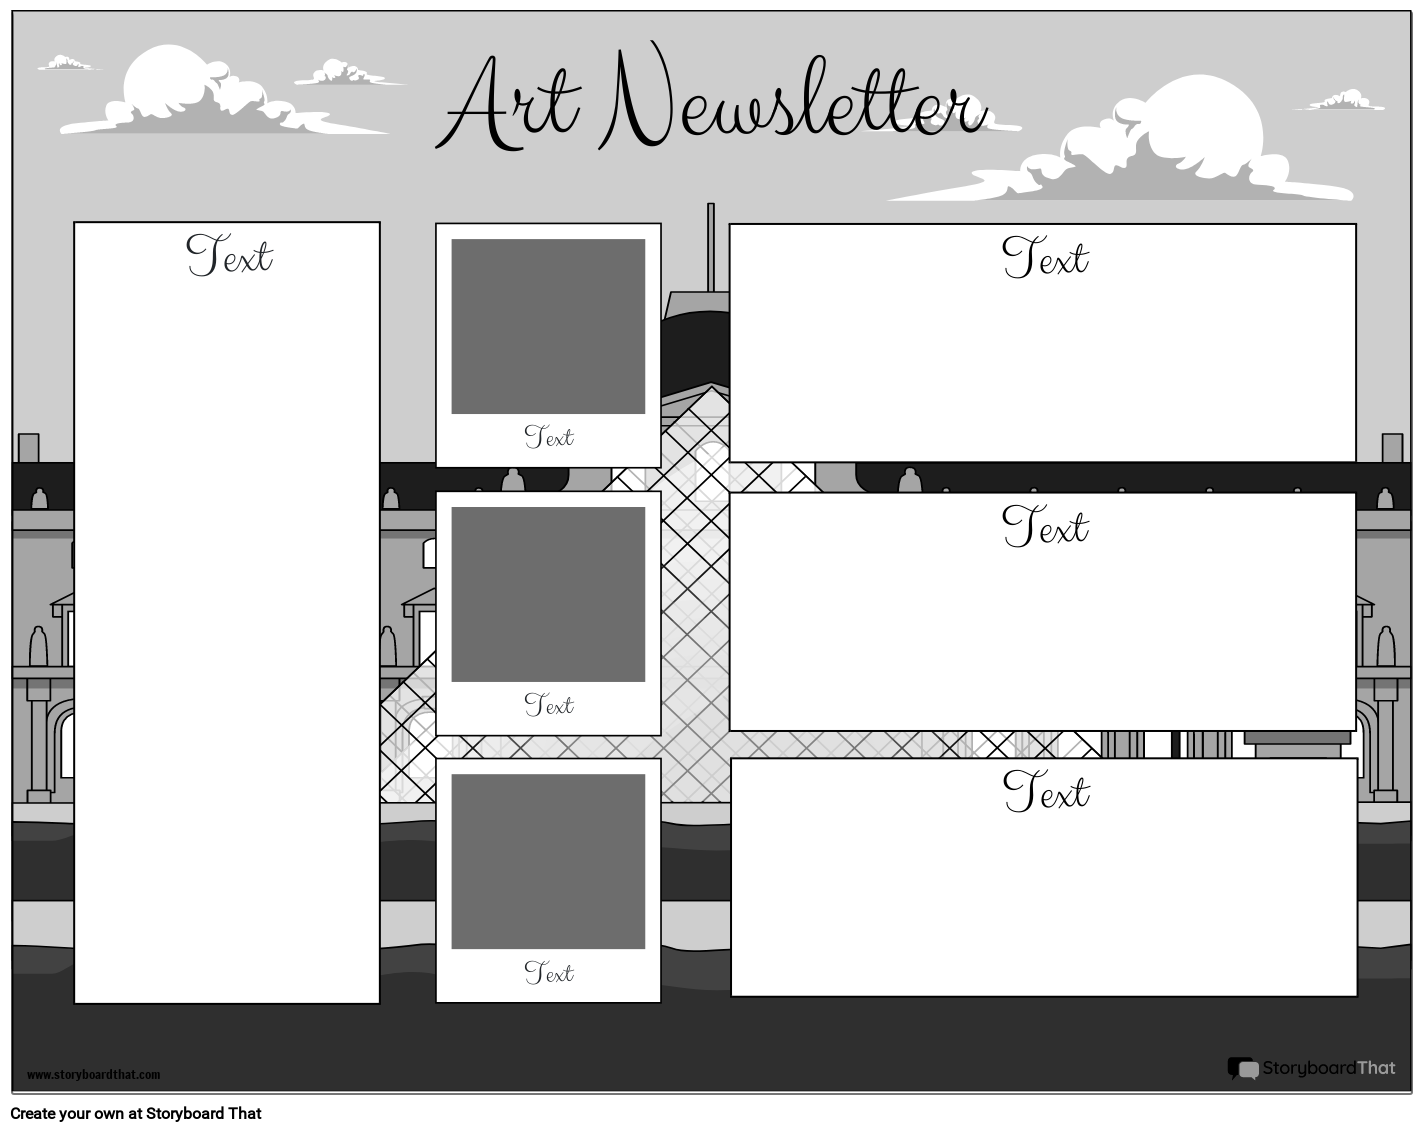 Newsletter Worksheet with Clouds and Boxes